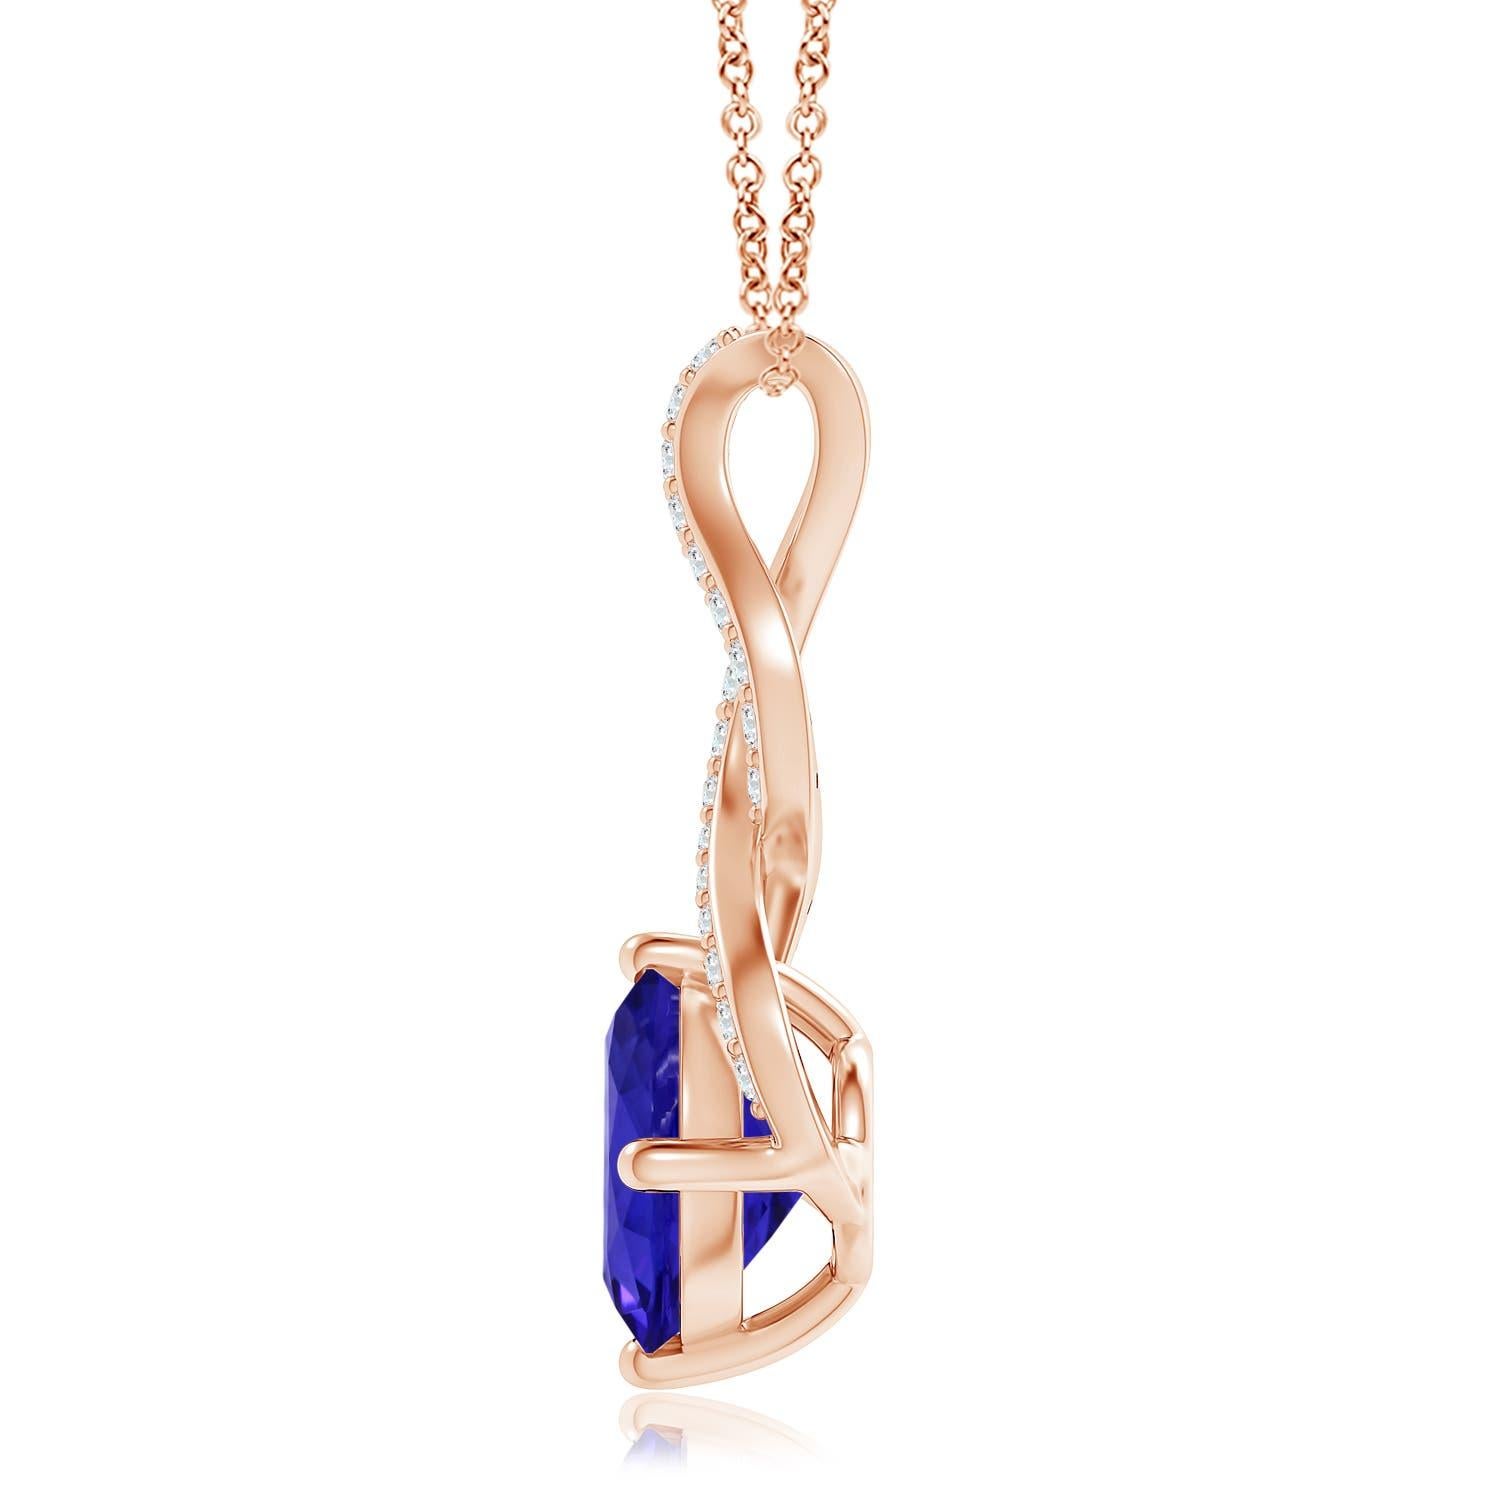 A beautiful interpretation of the iconic infinity sign, this 18k rose gold tanzanite pendant features a dazzling infinity-shaped bale. The prong-set GIA certified tanzanite is accentuated by the brilliant diamonds on the twisted bale.
